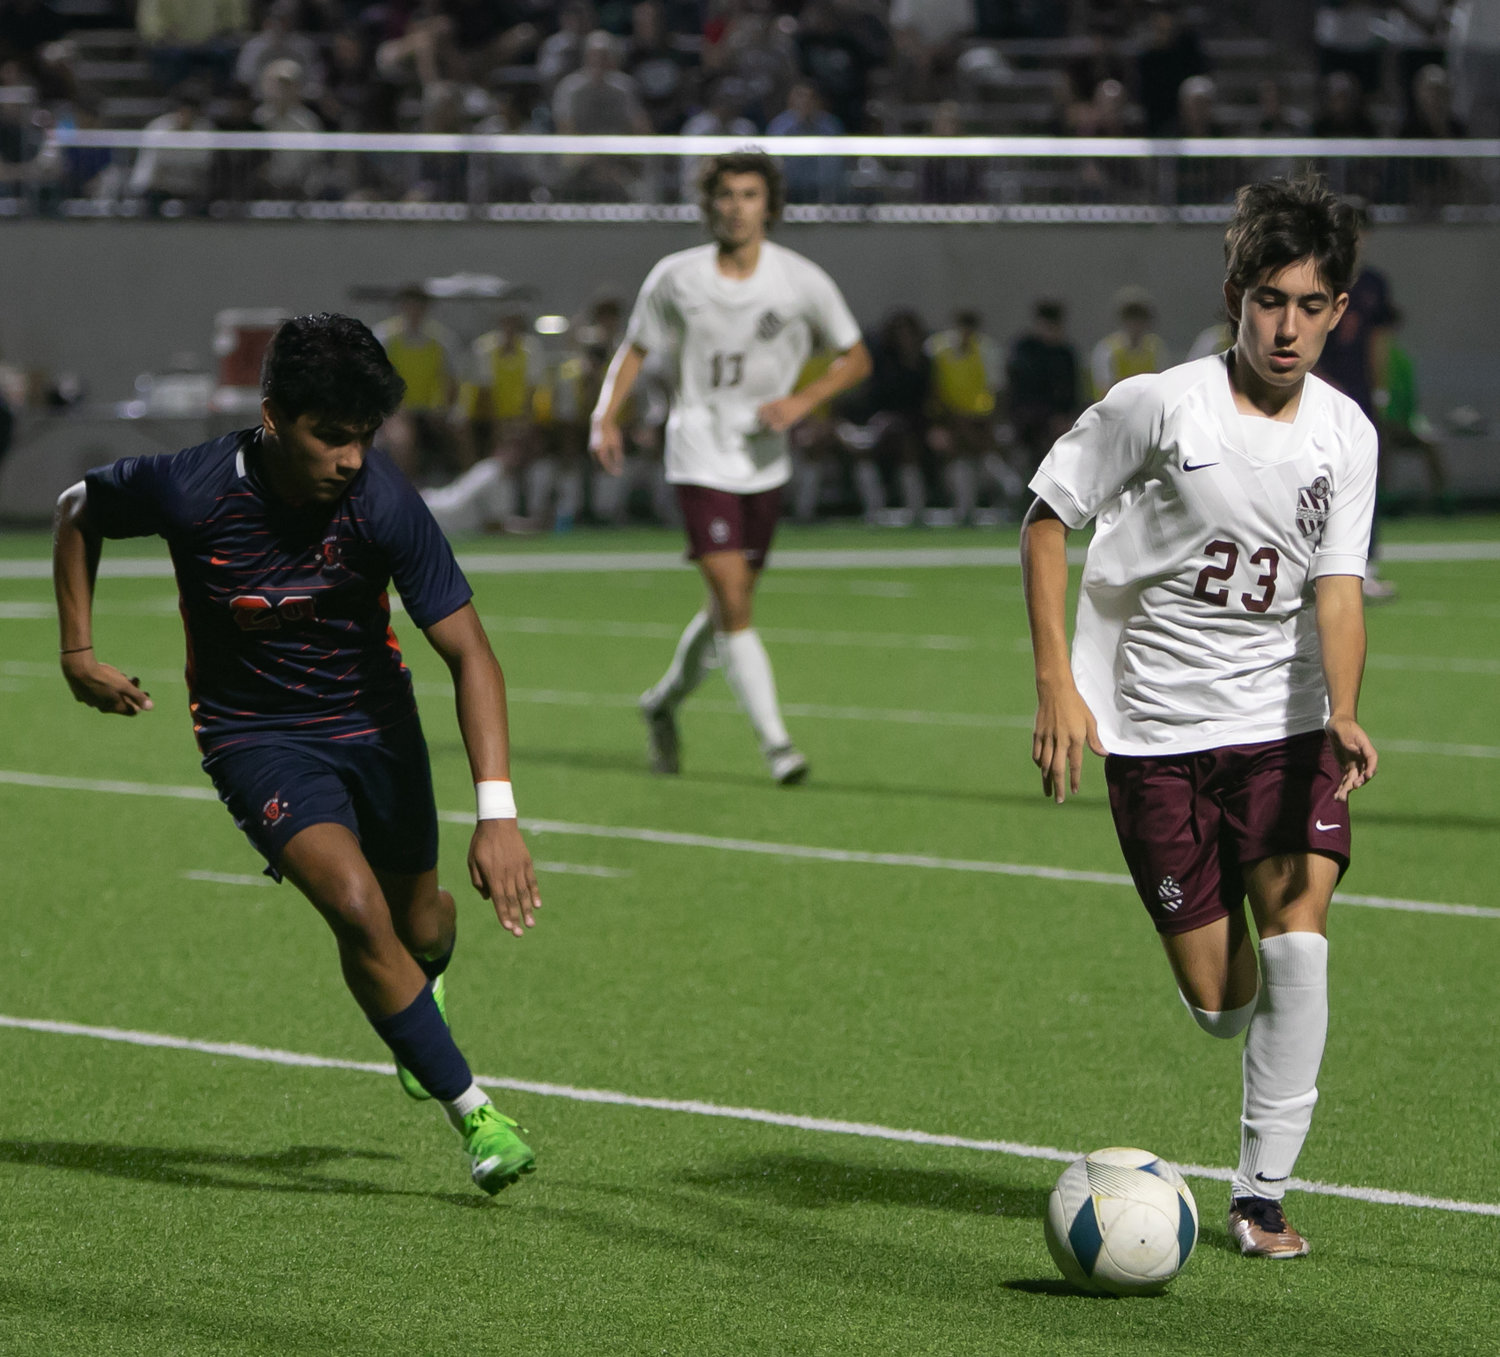 Noah Bosso dribbles a ball during Friday's Class 6A Regional Quarterfinal game between Seven Lakes and Cinco Ranch at Legacy Stadium.